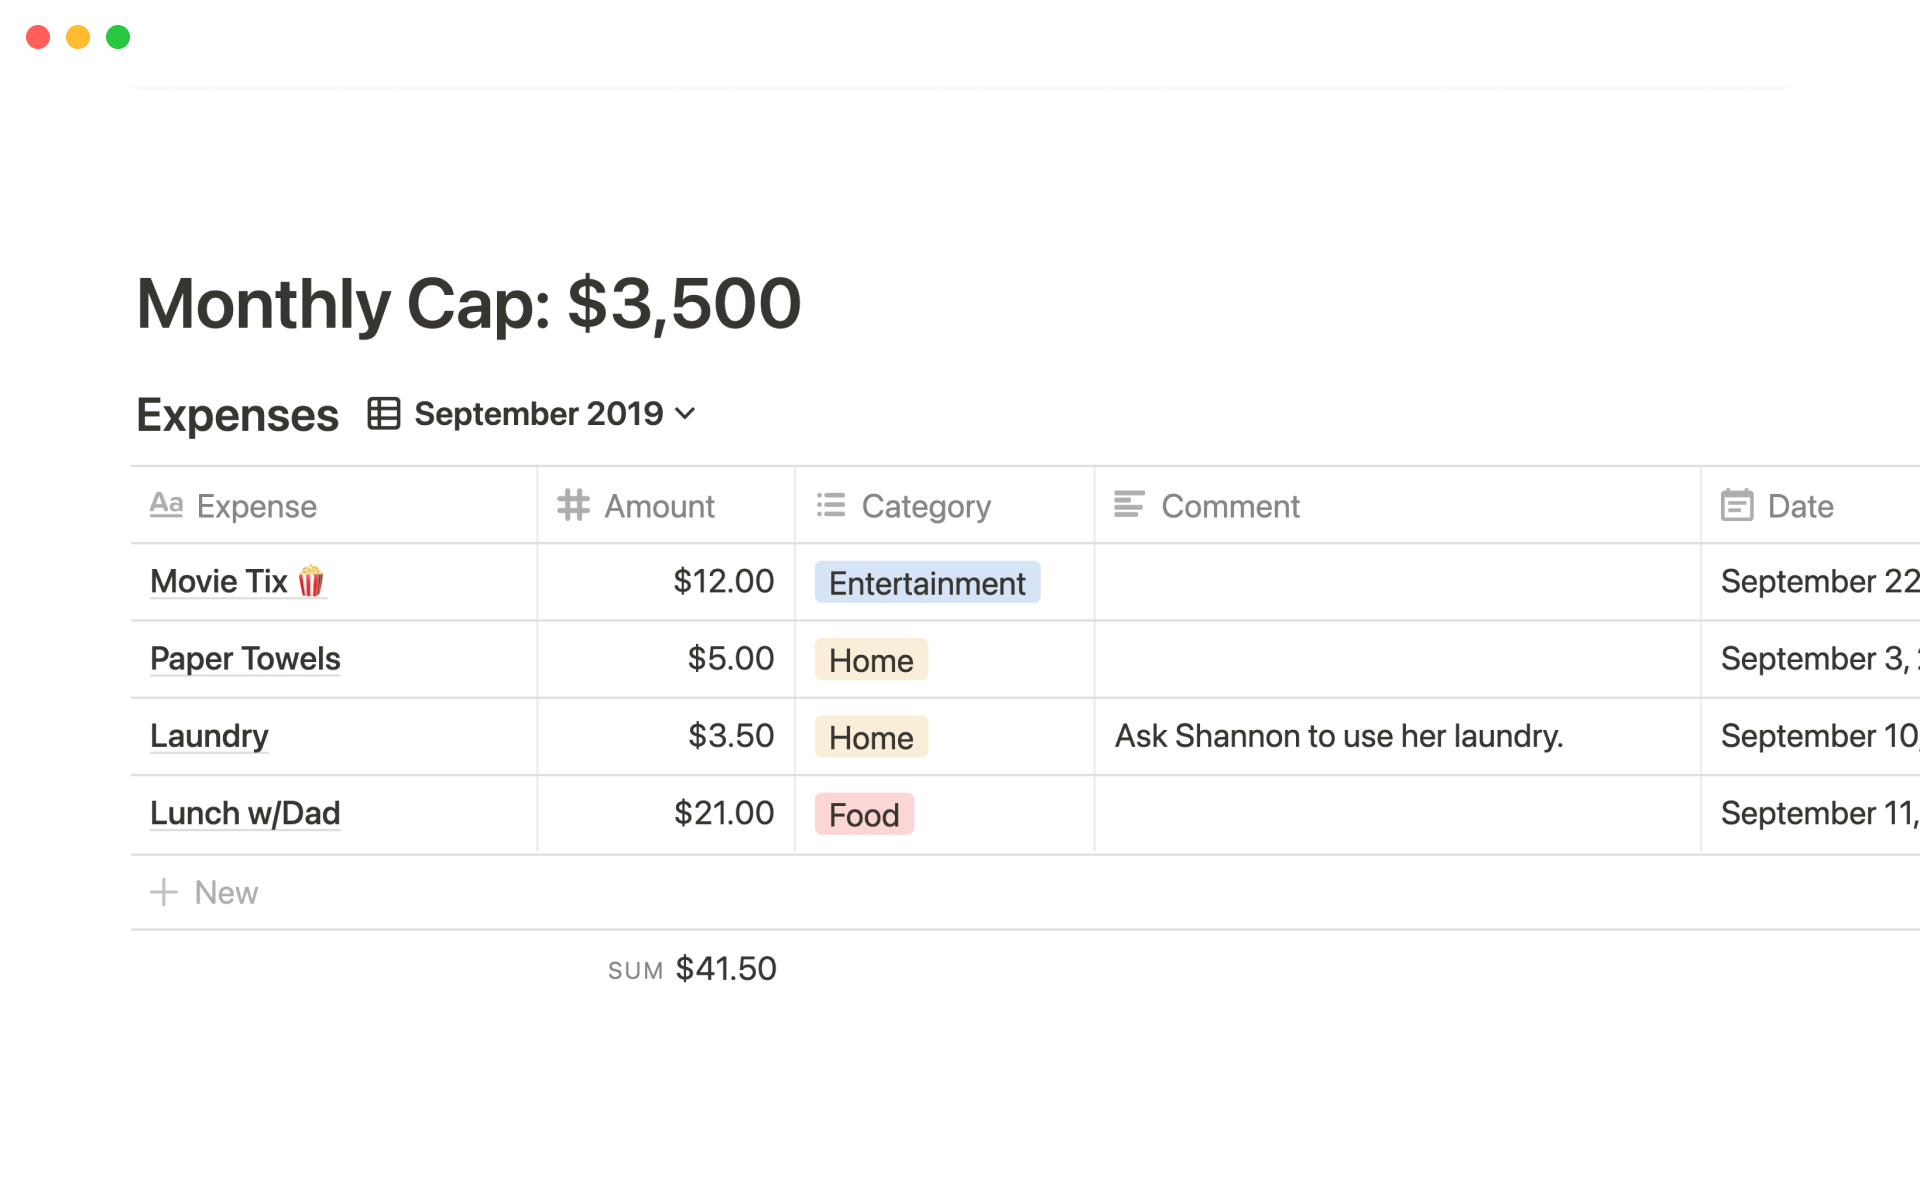 A screenshot of a budget planning document in Notion.